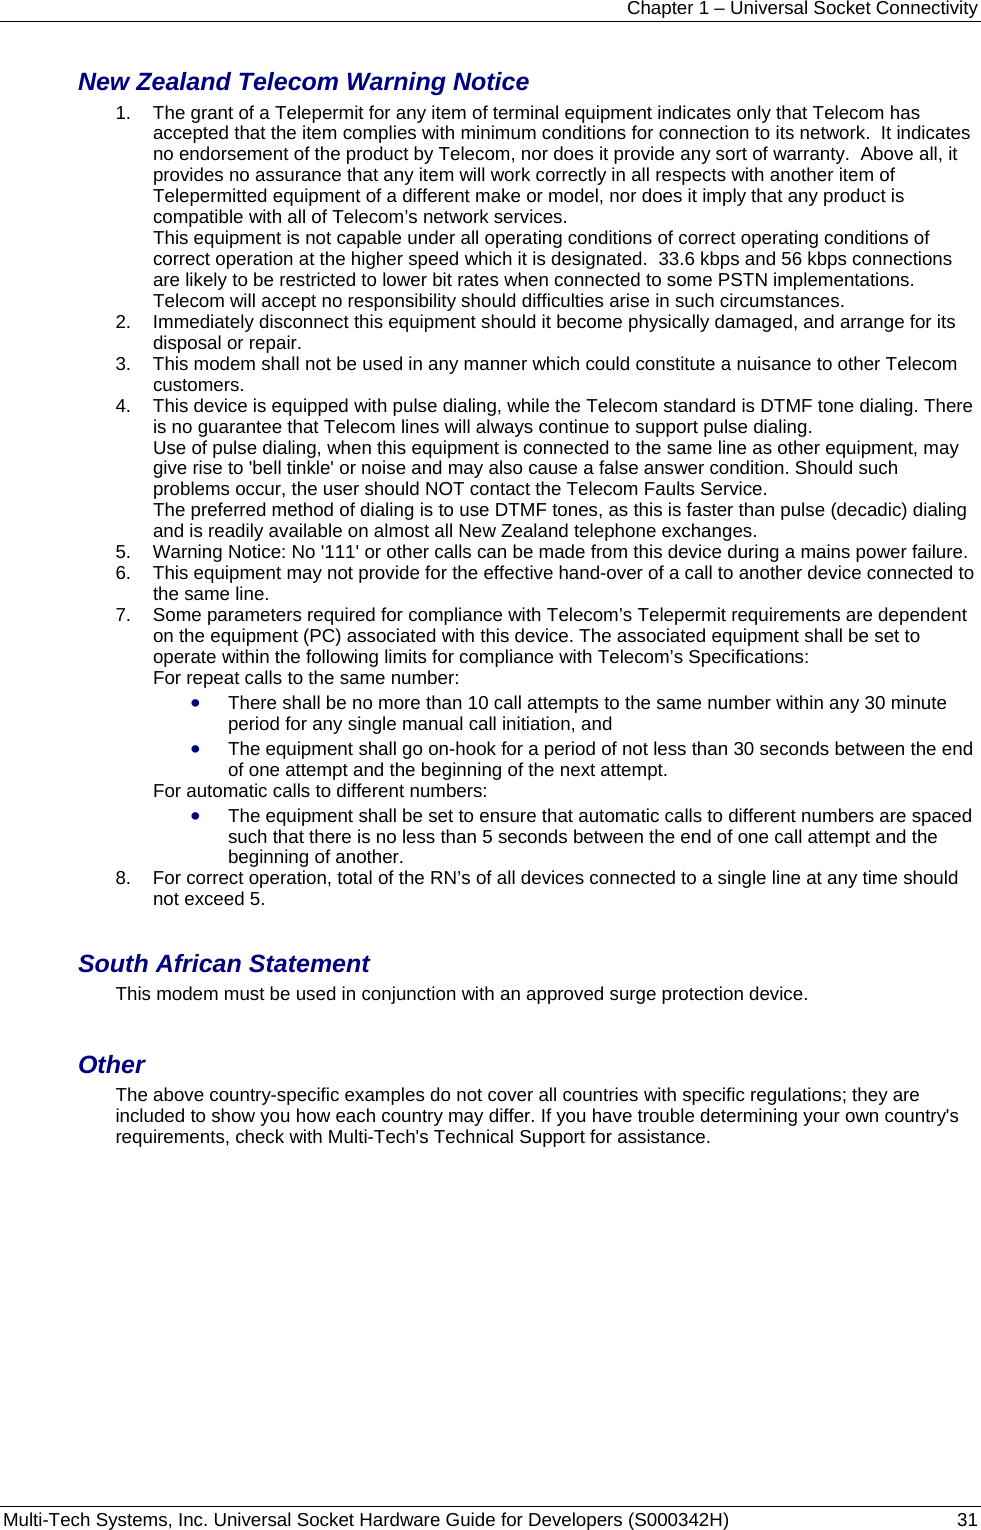 Chapter 1 – Universal Socket Connectivity Multi-Tech Systems, Inc. Universal Socket Hardware Guide for Developers (S000342H)  31  New Zealand Telecom Warning Notice 1.  The grant of a Telepermit for any item of terminal equipment indicates only that Telecom has accepted that the item complies with minimum conditions for connection to its network.  It indicates no endorsement of the product by Telecom, nor does it provide any sort of warranty.  Above all, it provides no assurance that any item will work correctly in all respects with another item of Telepermitted equipment of a different make or model, nor does it imply that any product is compatible with all of Telecom’s network services.   This equipment is not capable under all operating conditions of correct operating conditions of correct operation at the higher speed which it is designated.  33.6 kbps and 56 kbps connections are likely to be restricted to lower bit rates when connected to some PSTN implementations. Telecom will accept no responsibility should difficulties arise in such circumstances. 2.  Immediately disconnect this equipment should it become physically damaged, and arrange for its disposal or repair. 3.  This modem shall not be used in any manner which could constitute a nuisance to other Telecom customers. 4.  This device is equipped with pulse dialing, while the Telecom standard is DTMF tone dialing. There is no guarantee that Telecom lines will always continue to support pulse dialing.       Use of pulse dialing, when this equipment is connected to the same line as other equipment, may give rise to &apos;bell tinkle&apos; or noise and may also cause a false answer condition. Should such problems occur, the user should NOT contact the Telecom Faults Service.    The preferred method of dialing is to use DTMF tones, as this is faster than pulse (decadic) dialing and is readily available on almost all New Zealand telephone exchanges. 5.  Warning Notice: No &apos;111&apos; or other calls can be made from this device during a mains power failure. 6.  This equipment may not provide for the effective hand-over of a call to another device connected to the same line. 7.  Some parameters required for compliance with Telecom’s Telepermit requirements are dependent on the equipment (PC) associated with this device. The associated equipment shall be set to operate within the following limits for compliance with Telecom’s Specifications:   For repeat calls to the same number:   • There shall be no more than 10 call attempts to the same number within any 30 minute period for any single manual call initiation, and • The equipment shall go on-hook for a period of not less than 30 seconds between the end of one attempt and the beginning of the next attempt. For automatic calls to different numbers: • The equipment shall be set to ensure that automatic calls to different numbers are spaced such that there is no less than 5 seconds between the end of one call attempt and the beginning of another. 8.  For correct operation, total of the RN’s of all devices connected to a single line at any time should not exceed 5.  South African Statement This modem must be used in conjunction with an approved surge protection device.  Other The above country-specific examples do not cover all countries with specific regulations; they are included to show you how each country may differ. If you have trouble determining your own country&apos;s requirements, check with Multi-Tech&apos;s Technical Support for assistance. 